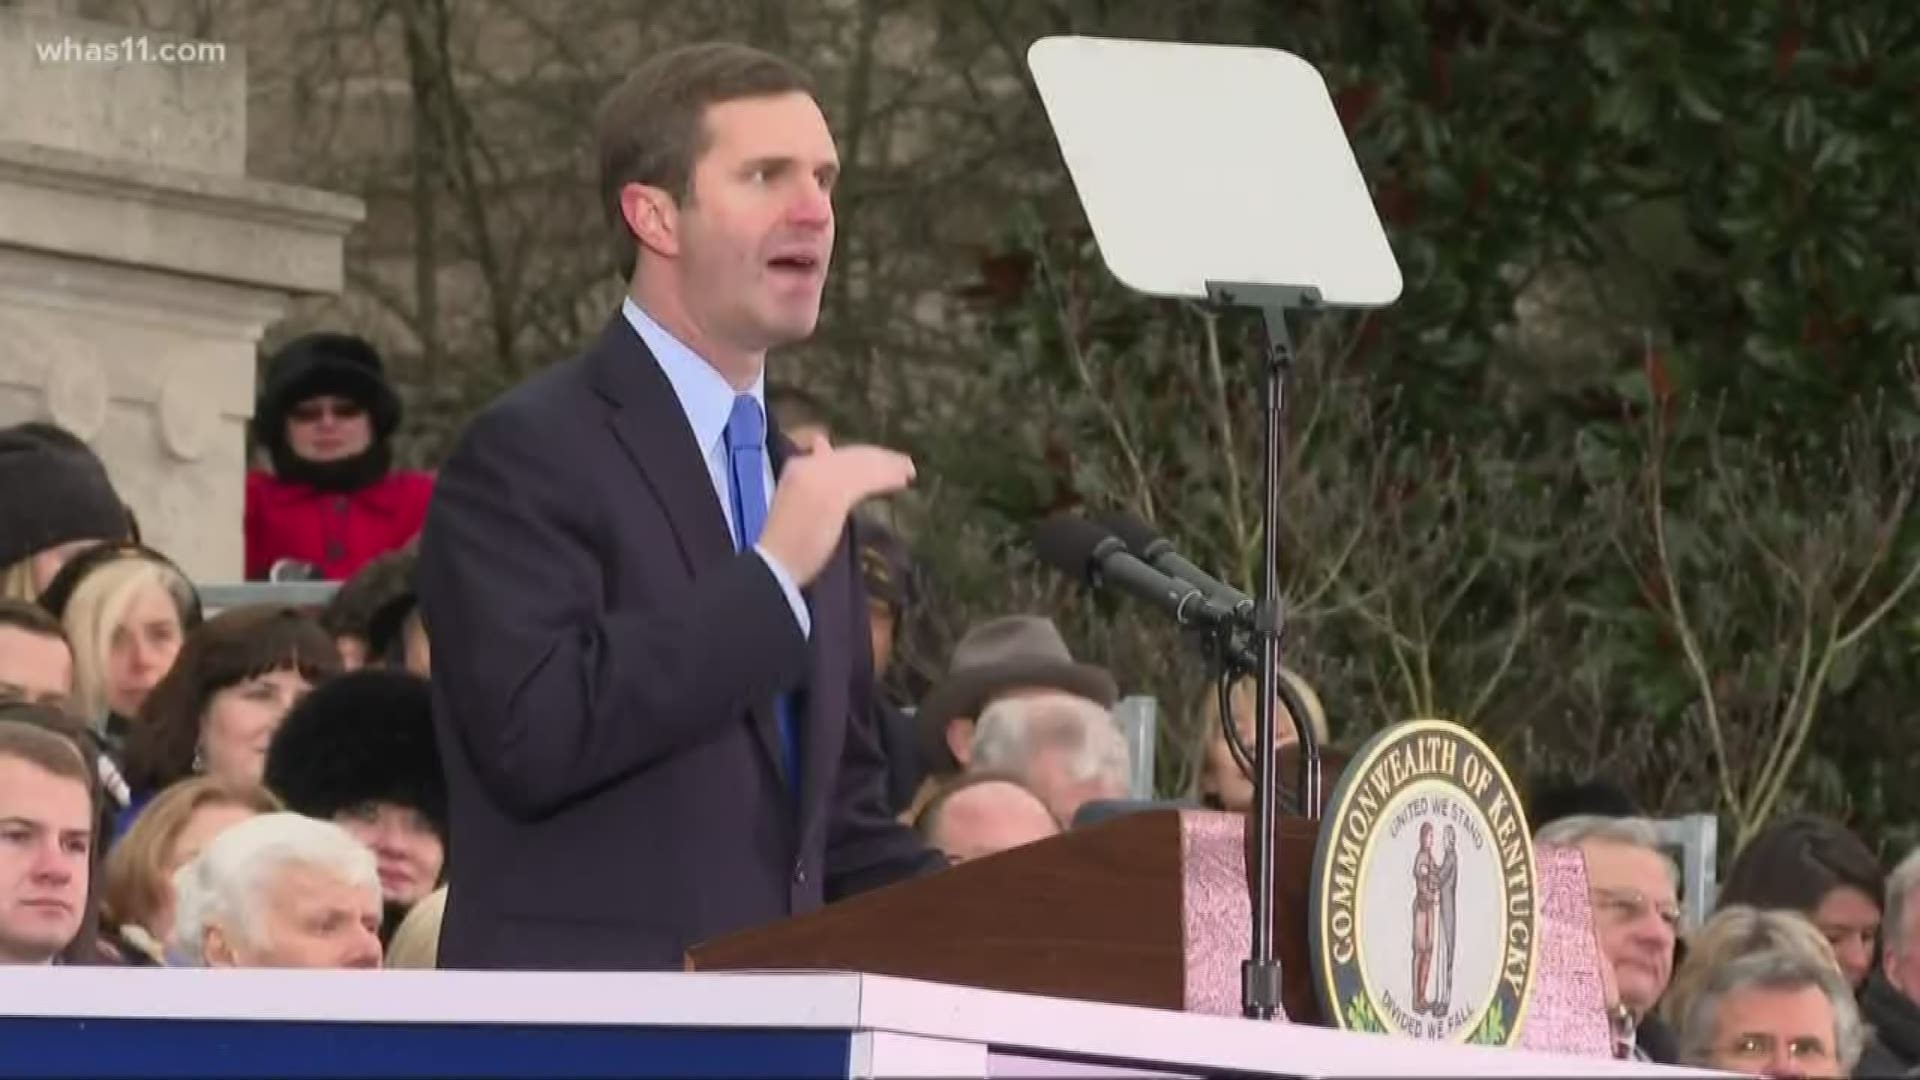 During his inaugural speech, Beshear announced he will restore voting rights to 100,000 Kentuckians, give public teachers a $2K raise, and will reorganize the KBE.